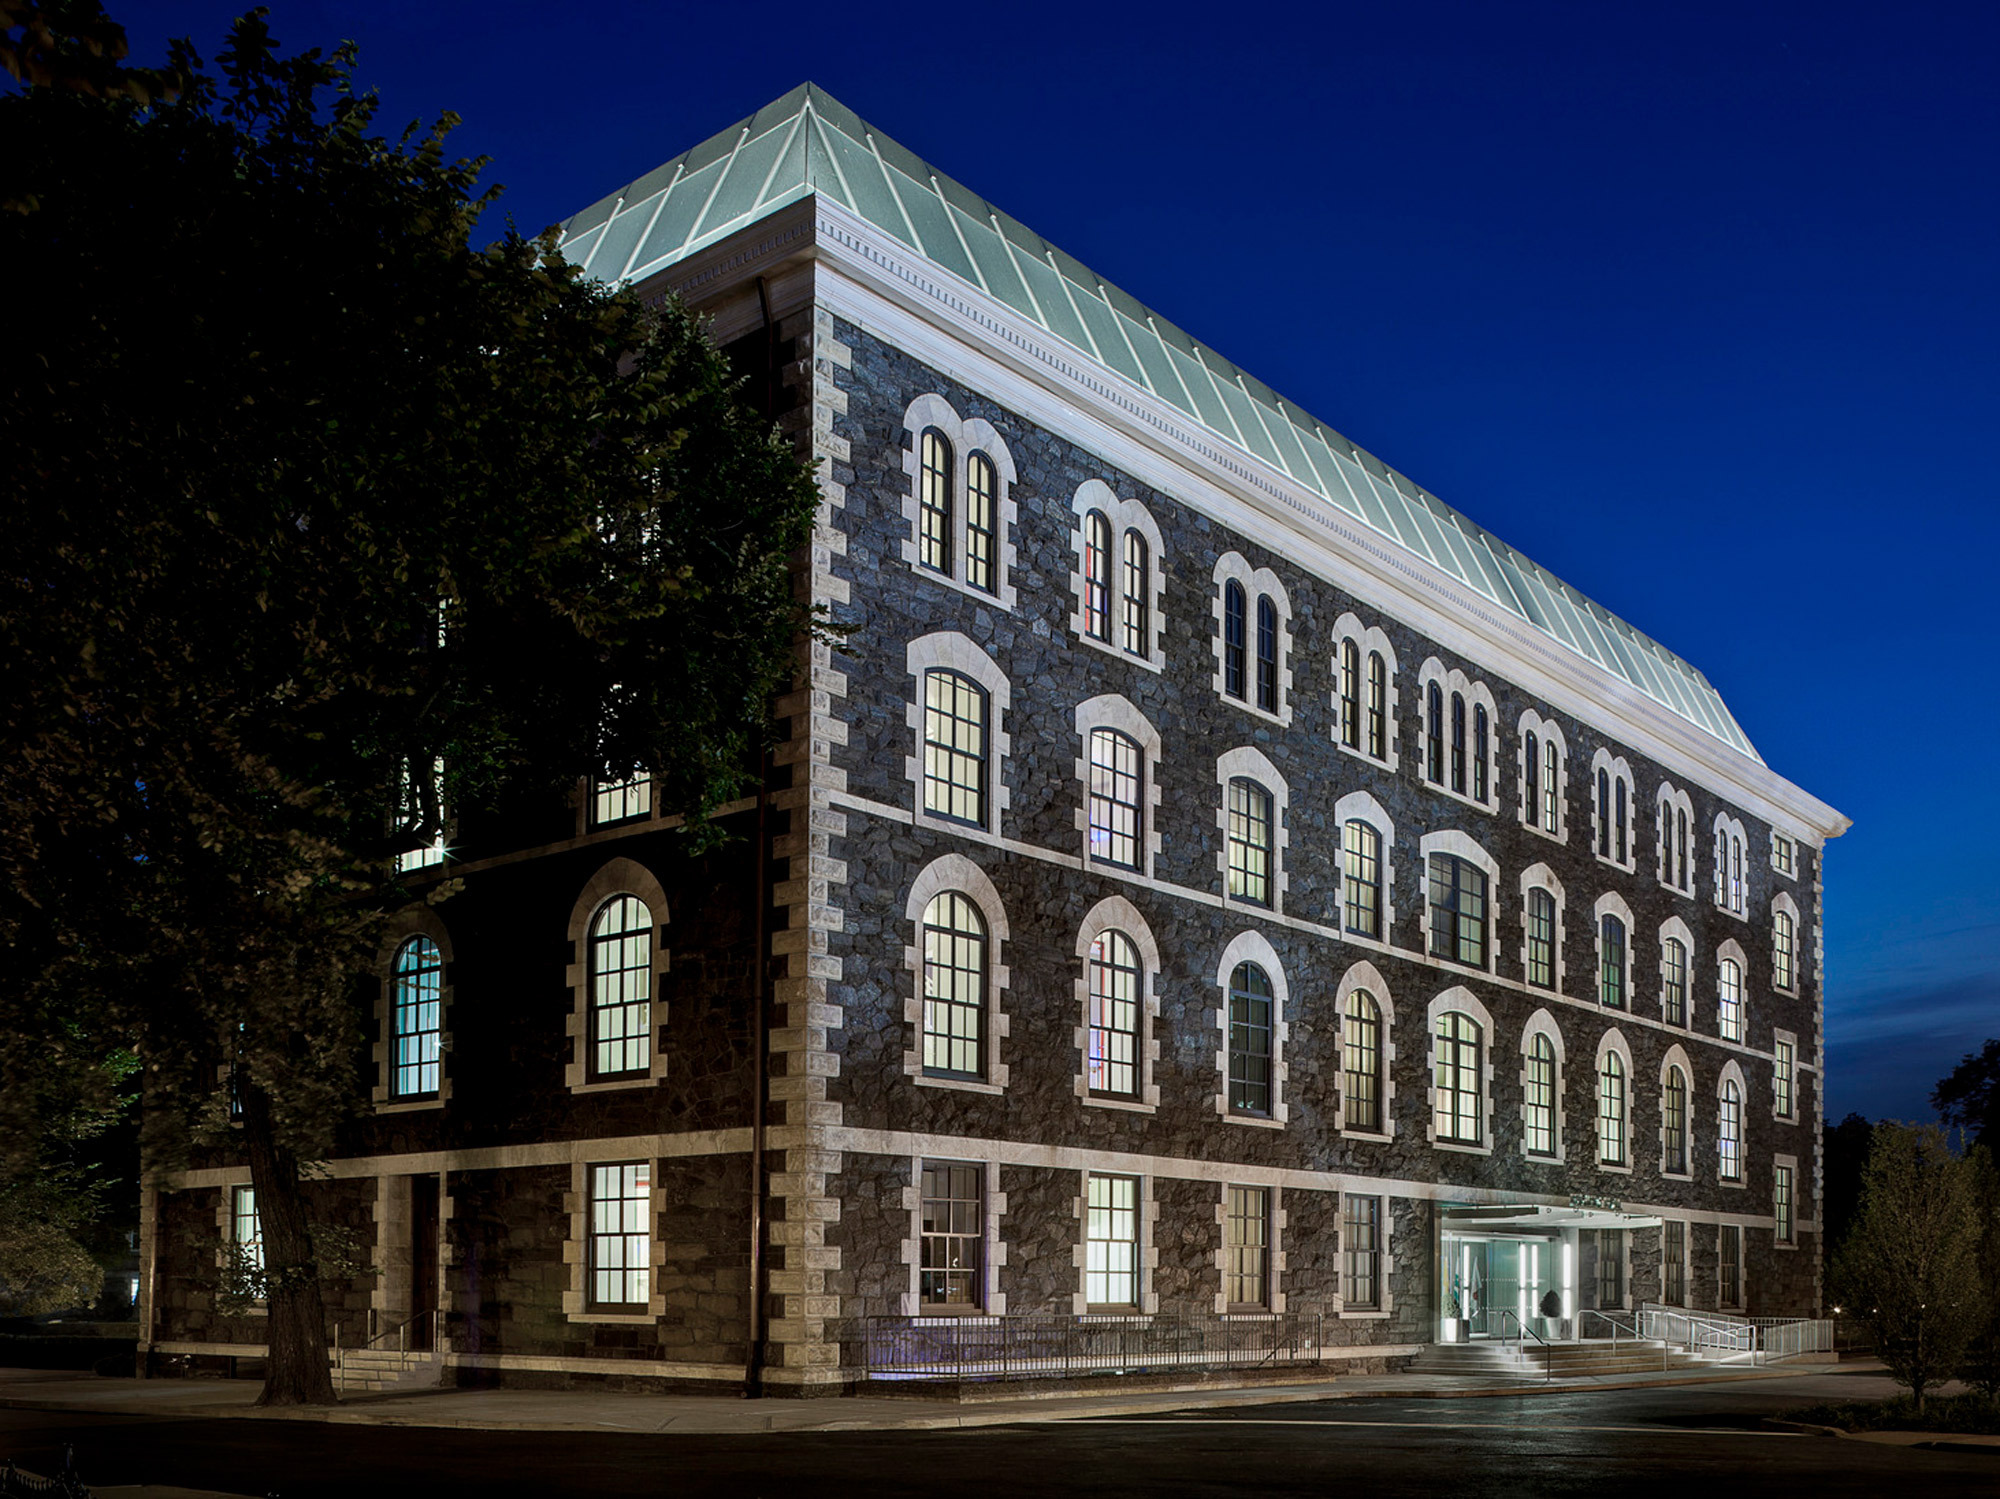 Twilight highlights the stone facade and pronounced arches of a renovated historical building, featuring a modern glass roof addition that blends old architectural charm with contemporary design.